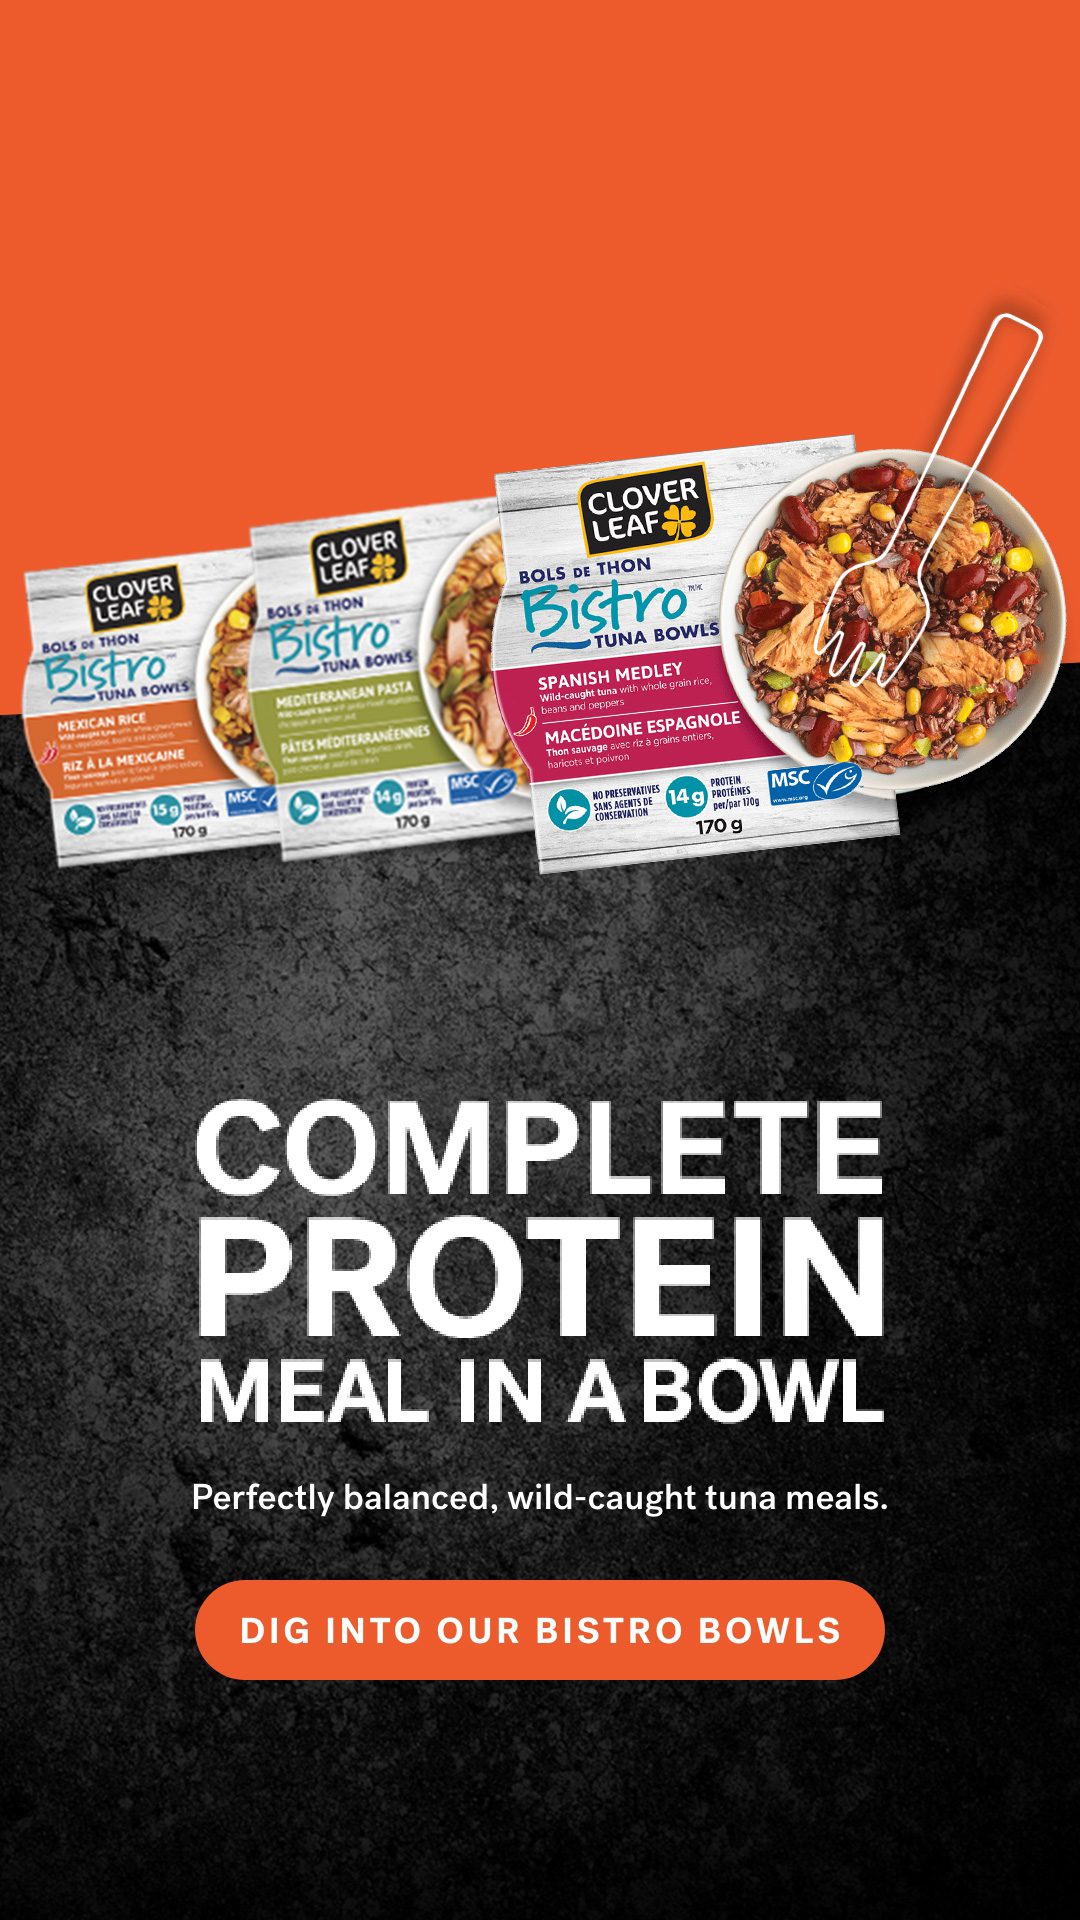 Complete protein meal in a bowl. Perfectly balanced, wild-caught tuna meals. DIG INTO OUR Bistro Bowls.